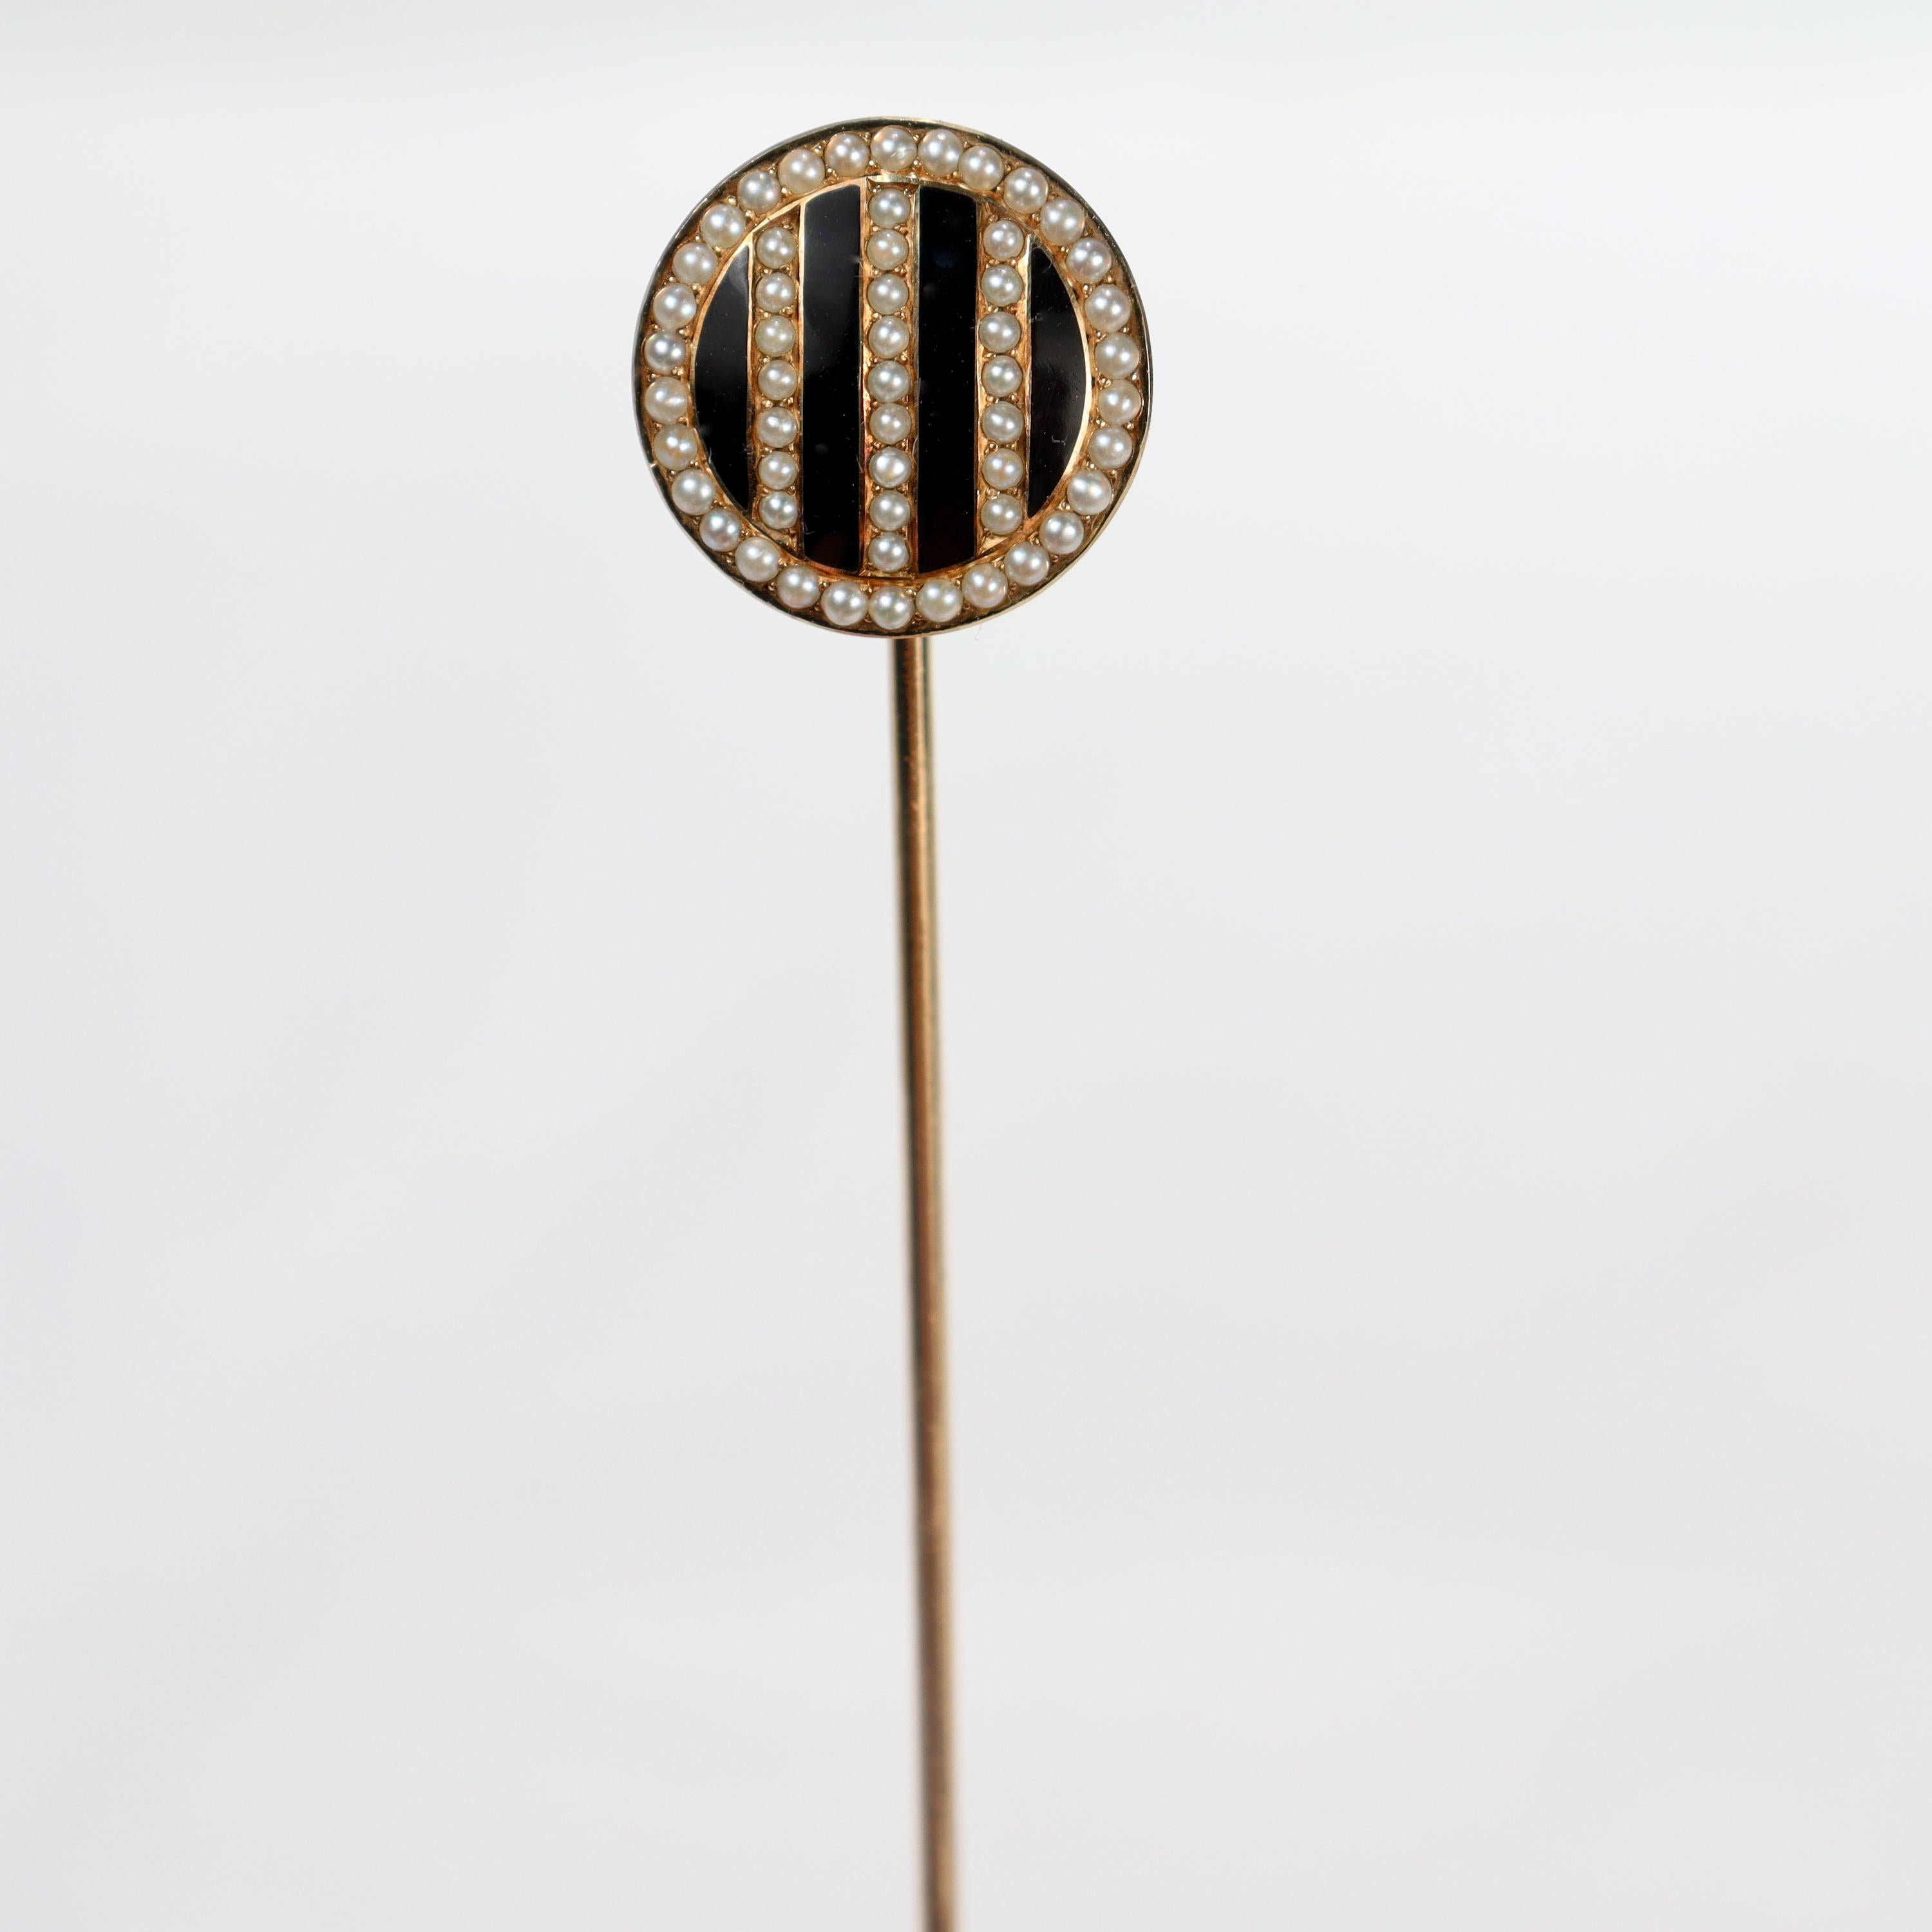 A very fine signed Art Deco hat pin.

By Riker Bros.

In 14k yellow gold. 

With alternating stripes of black enamel and channel set seed pearls. 

The reverse is hinged to very long pin stem.

Simply a wonderfully handsome Art Deco hat